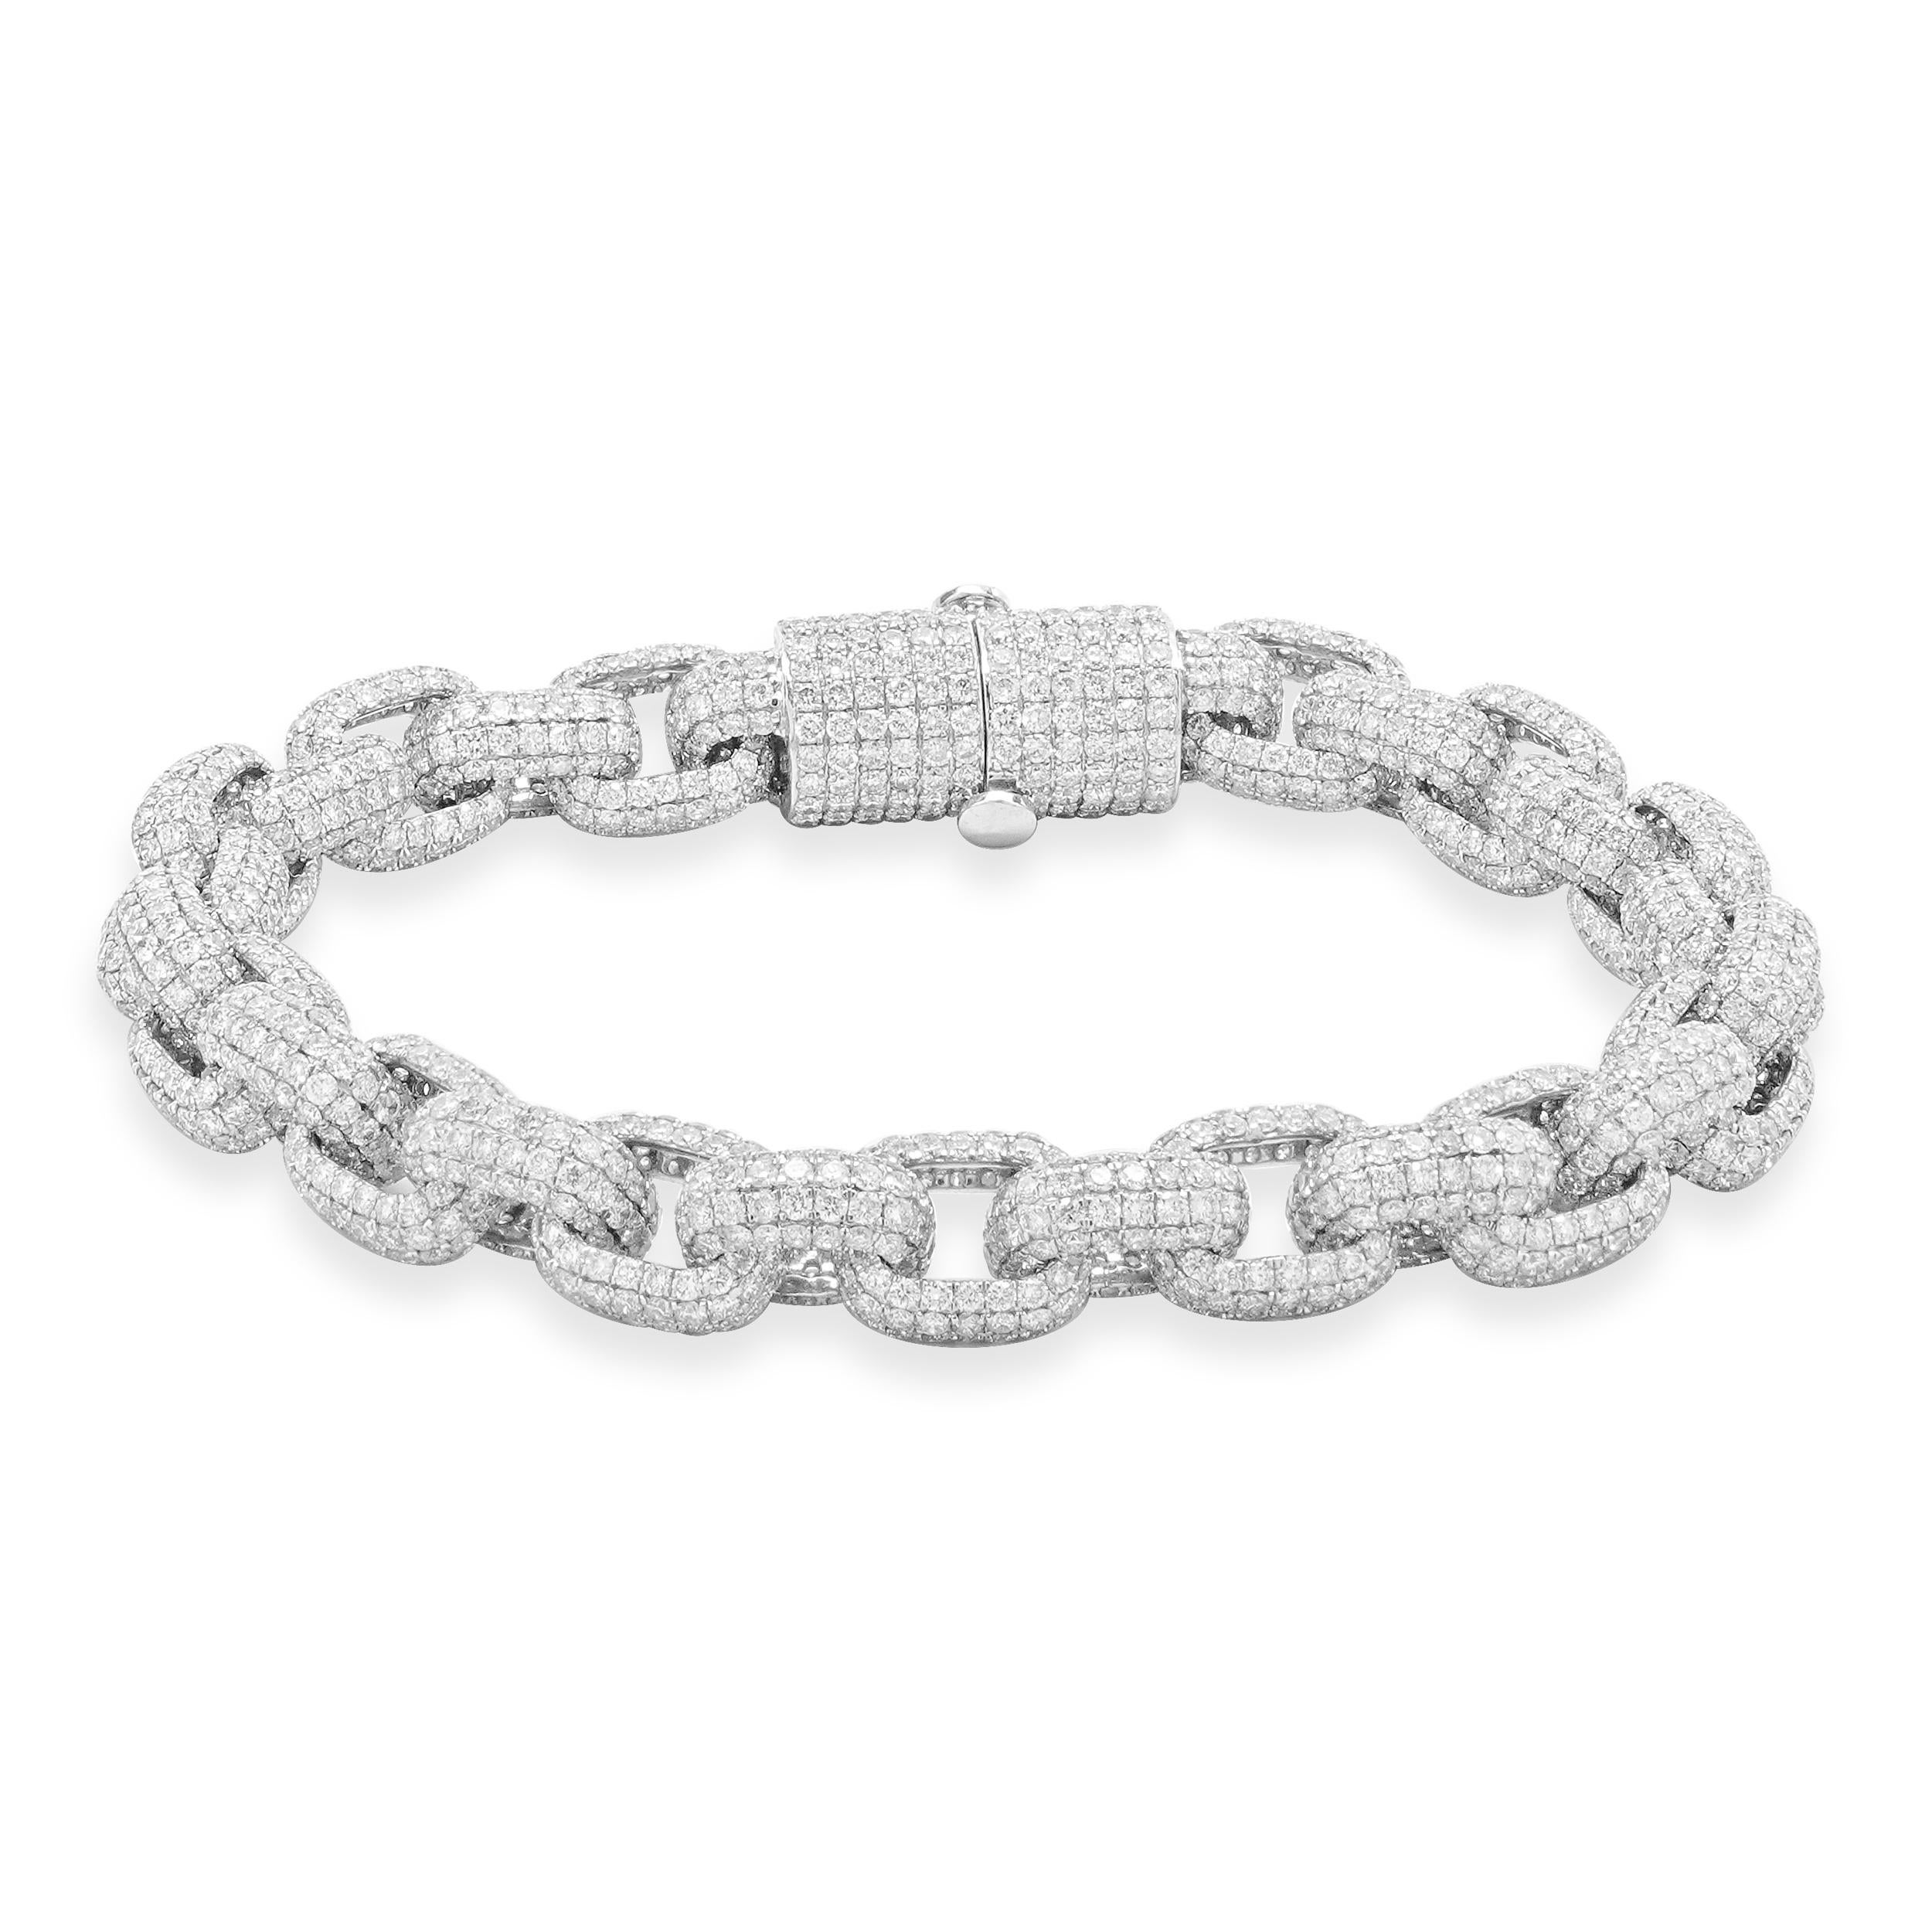 Designer: custom design
Material: 14K white gold
Diamond: round brilliant cut = 25.30cttw
Color: G
Clarity: VS-SI1
Dimensions: bracelet will fit up to a 7-inch wrist
Weight: 32.33 grams
